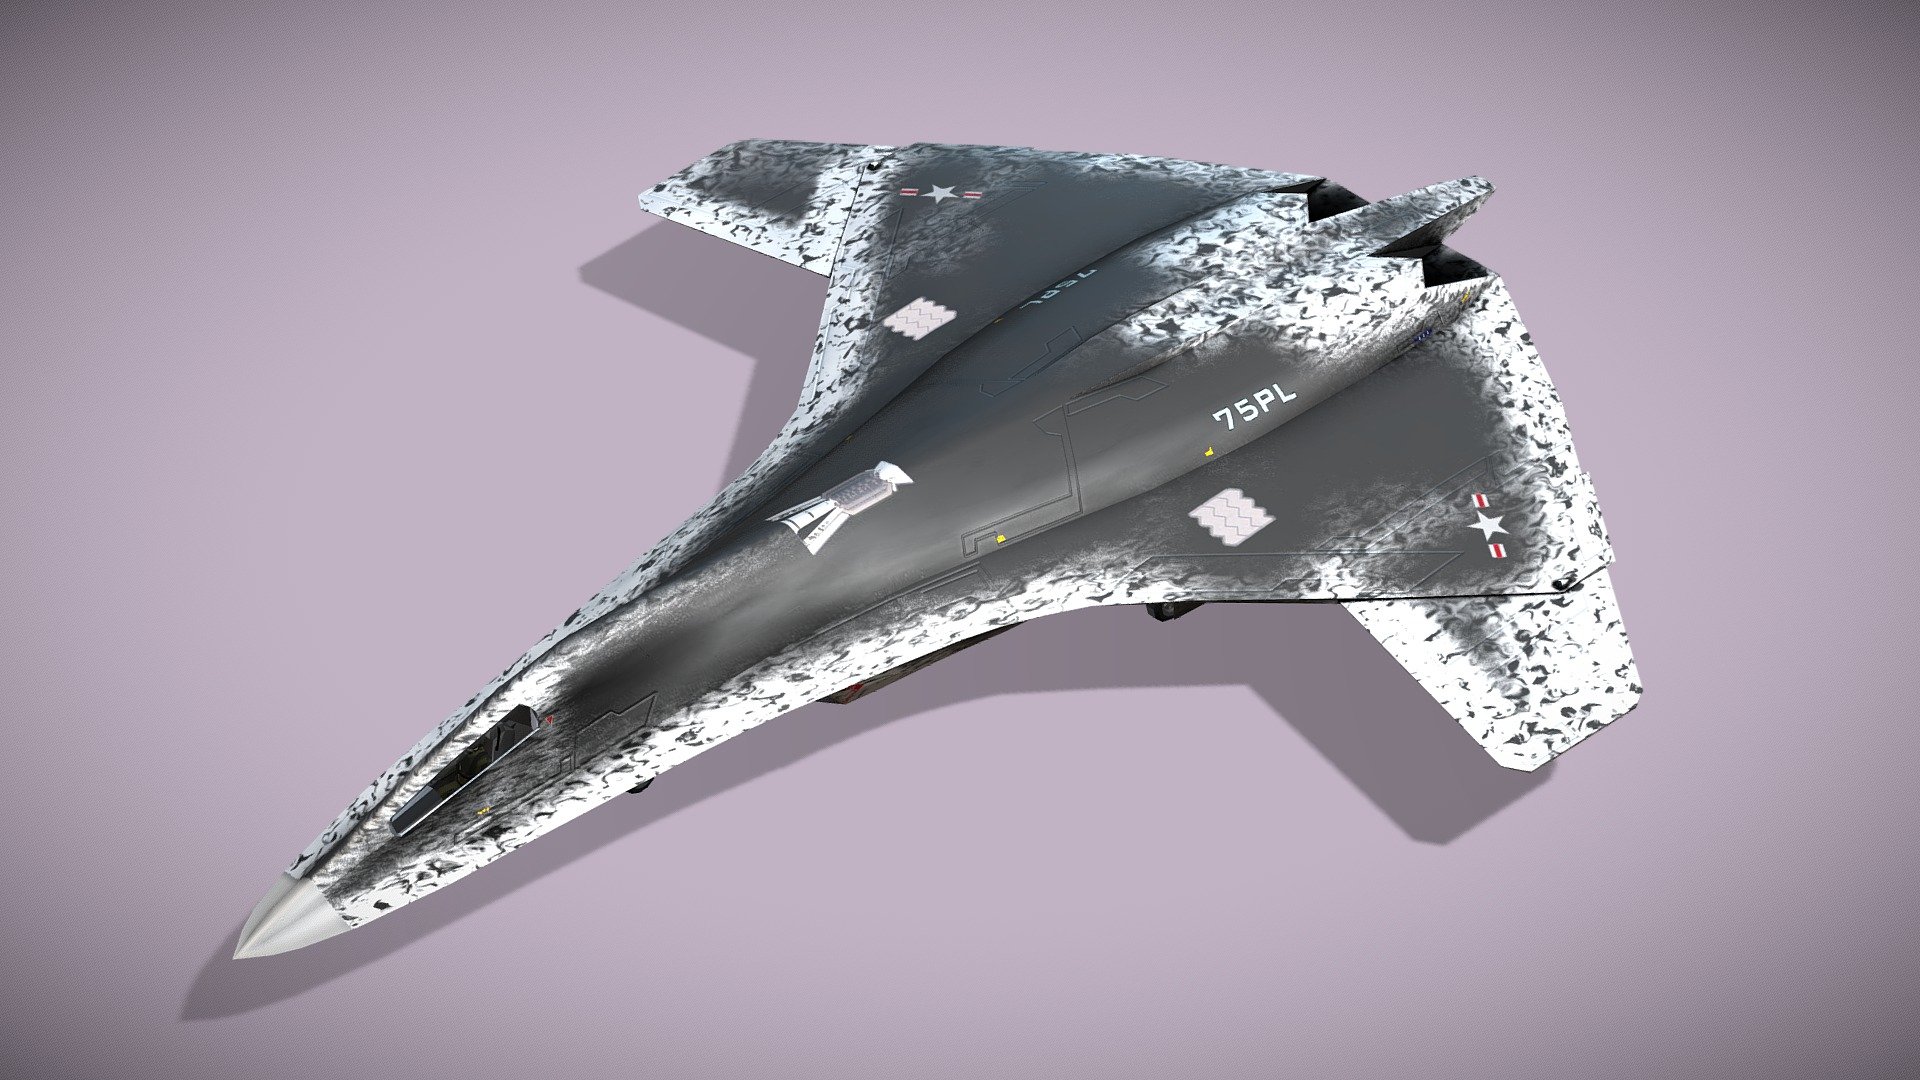 Lockheed NGAD deux

Lowpoly model of concept hypersonic 6th gen fighter



The Next Generation Air Dominance (NGAD) is a United States Air Force 6th-generation fighter initiative with a goal of fielding a family of systems that is to eventually supersede the Lockheed Martin F-22 Raptor. A manned fighter aircraft is the centerpiece program of the initiative is to be supported by unmanned “Loyal Wingman” platforms.

This is my concept of NGAD deux (2nd concept) with manned fighter. For low speed maneuverability wings have reverse variable sweep. Missiles are keept in bottom and top bays. Forward ailerons allows to make it super agile during subsonic flight. Additional airbrakes support flight steering. F-23 style ehaust make this NGAD stealthy.



Fully rigged

Model has bump, metal, roughness maps and 2 x diffuse textures.



Check also my other aircrafts and cars.

Patreon with monthly free model - Lockheed NGAD deux - concept fighter - Buy Royalty Free 3D model by NETRUNNER_pl 3d model